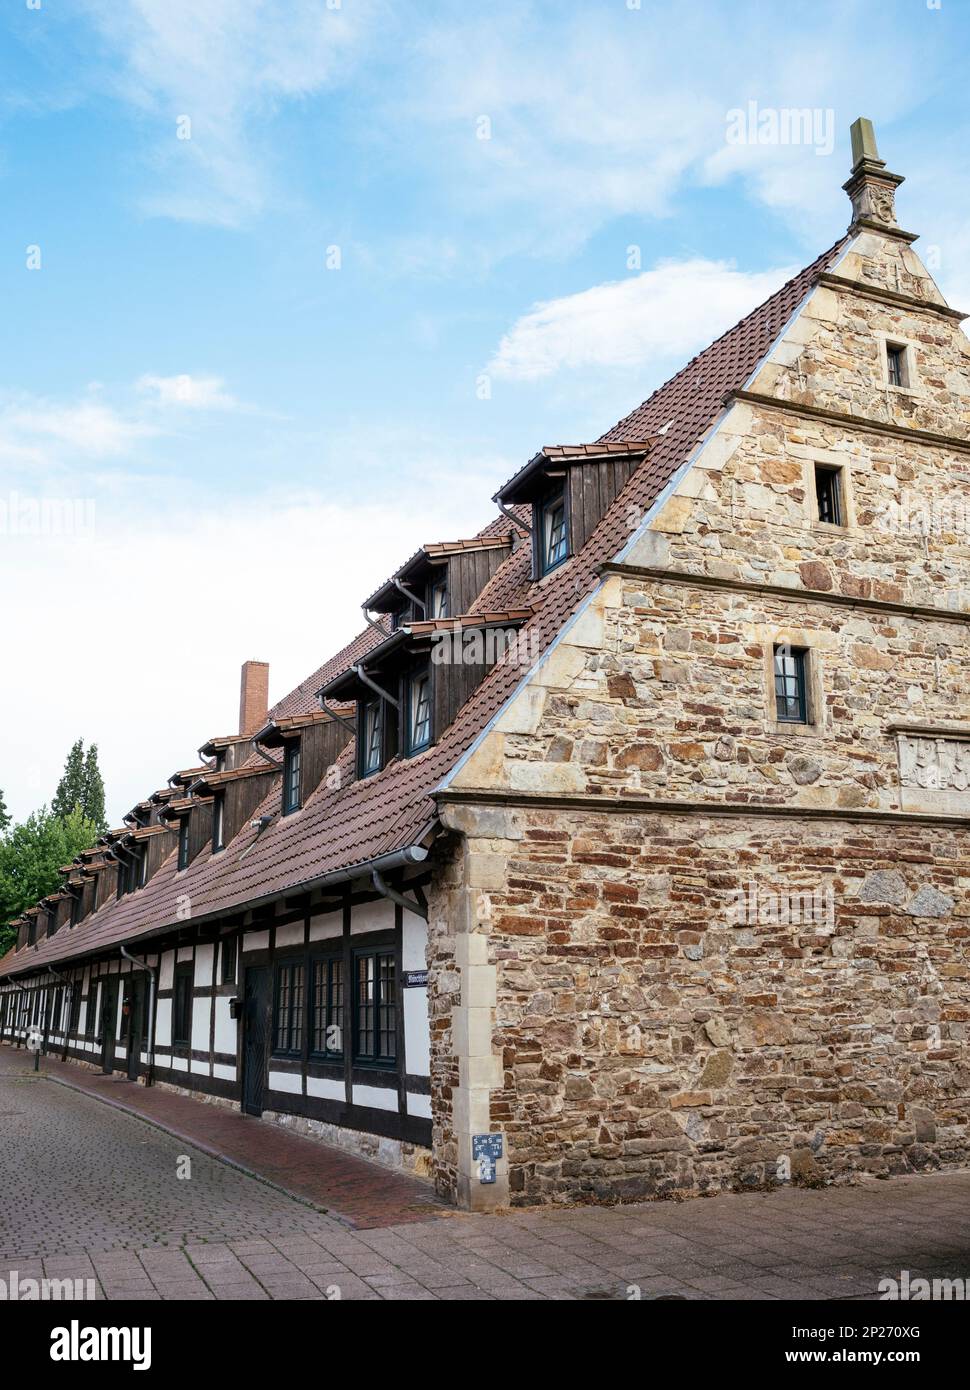 Traditional timber frame houses in Rinteln (Münchhausenhof). Built in the 16th century by Hilmar von Münchhausen. Stock Photo